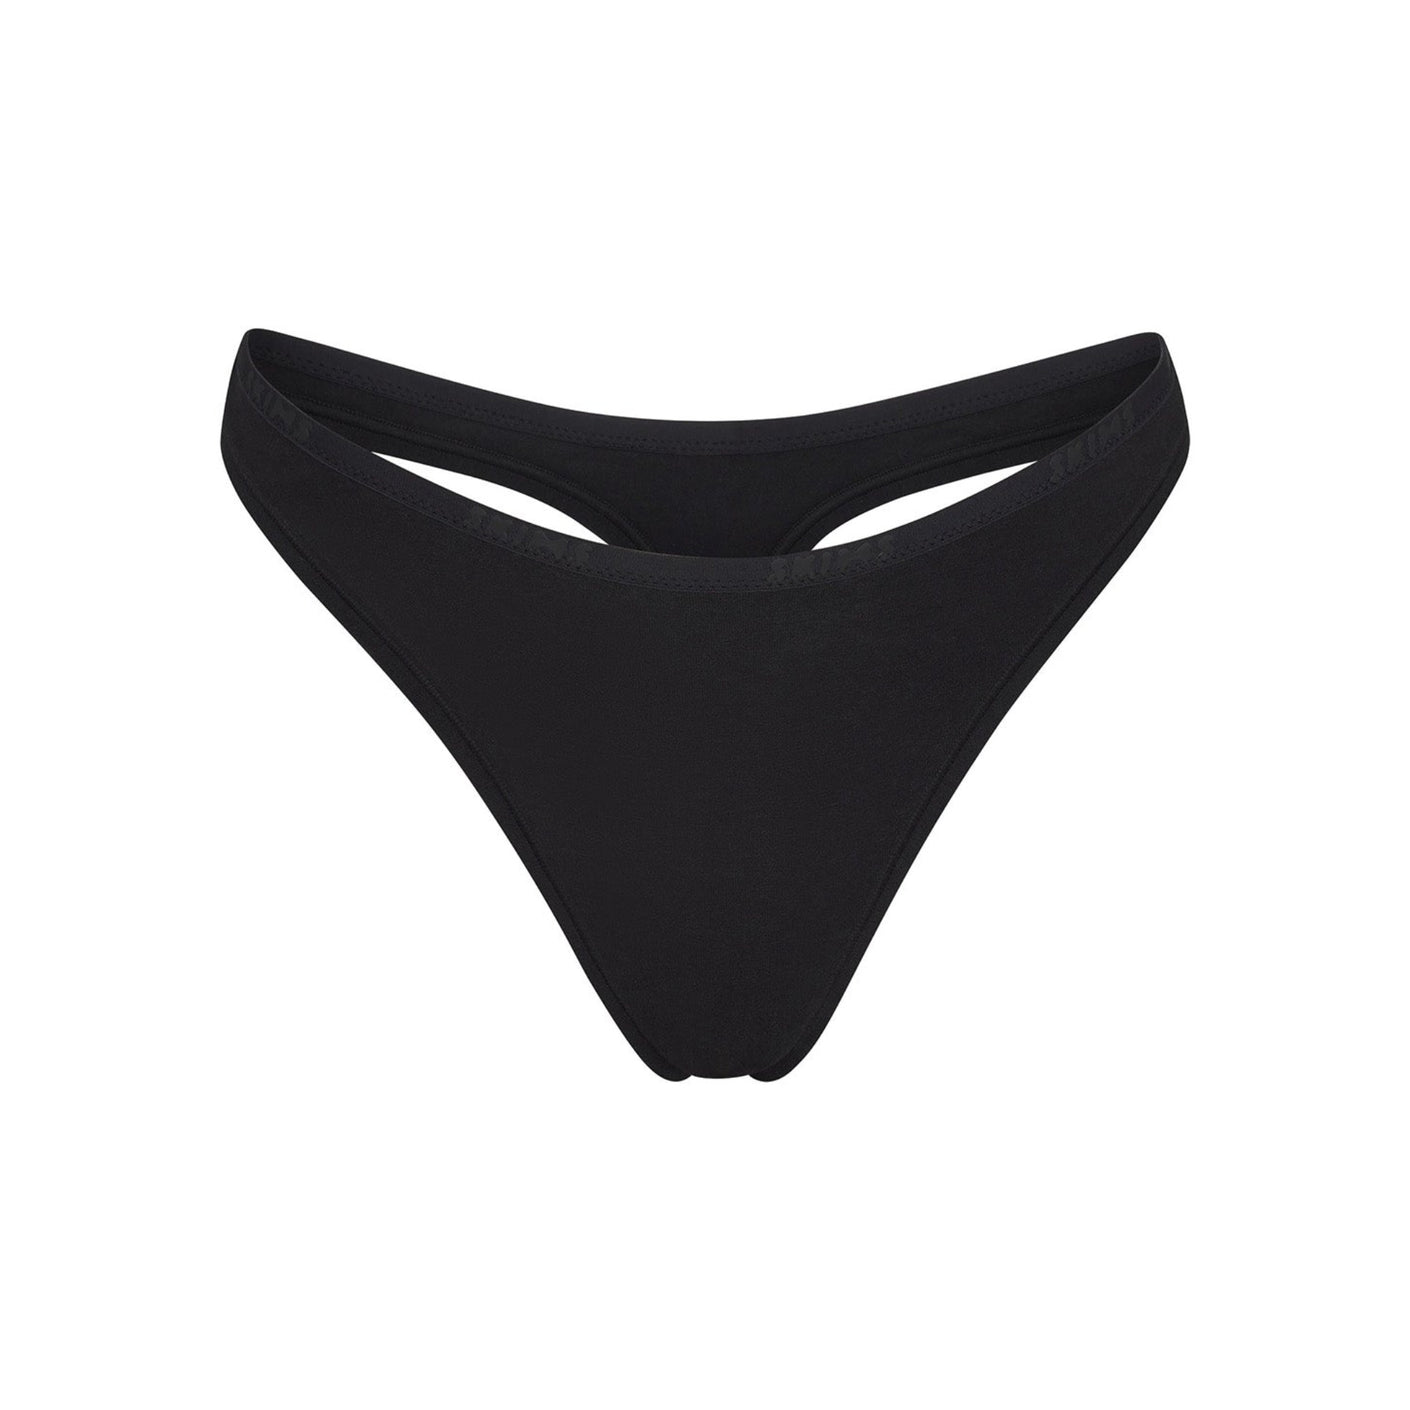 https://cdn.shopify.com/s/files/1/0259/5448/4284/products/SKIMS-PANTY-PN-DTH-2002-SOT_840a5241-ed52-42fb-92cc-05a5c9fa2aad.jpg?v=1660857957&width=1410&height=1410